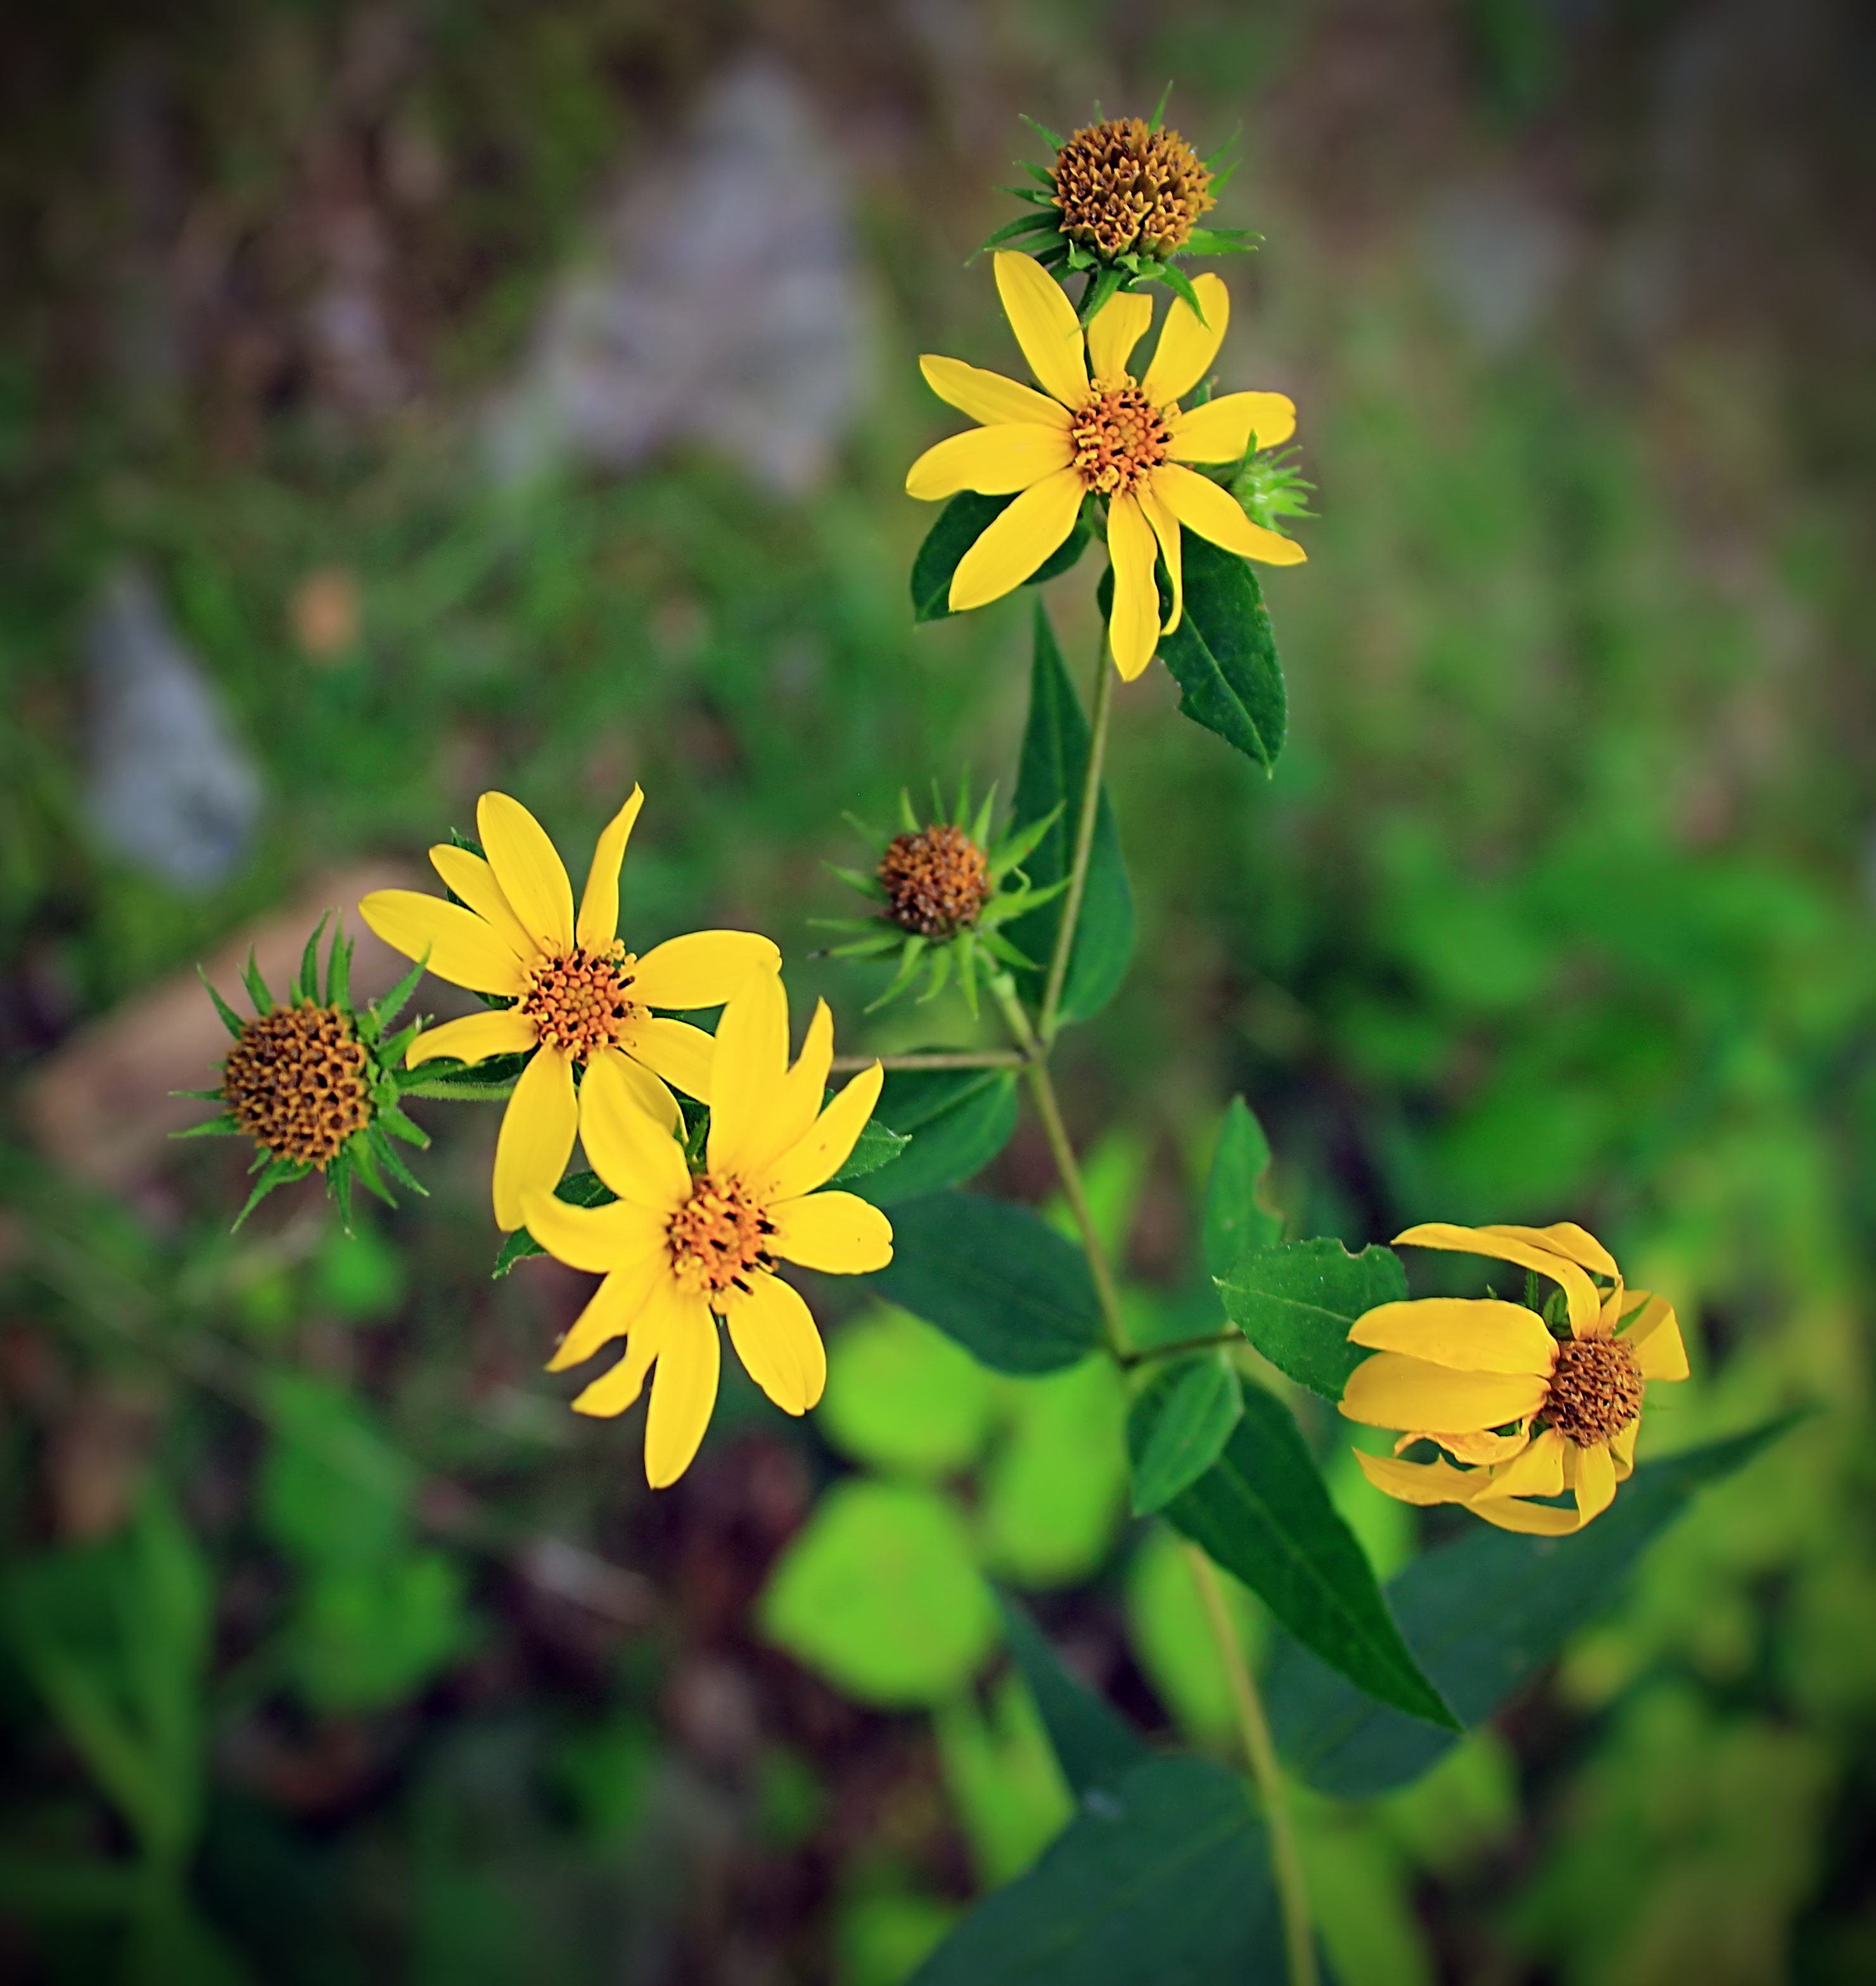 Four yellow blossoms of slender petals radiating around a tight orange center. 